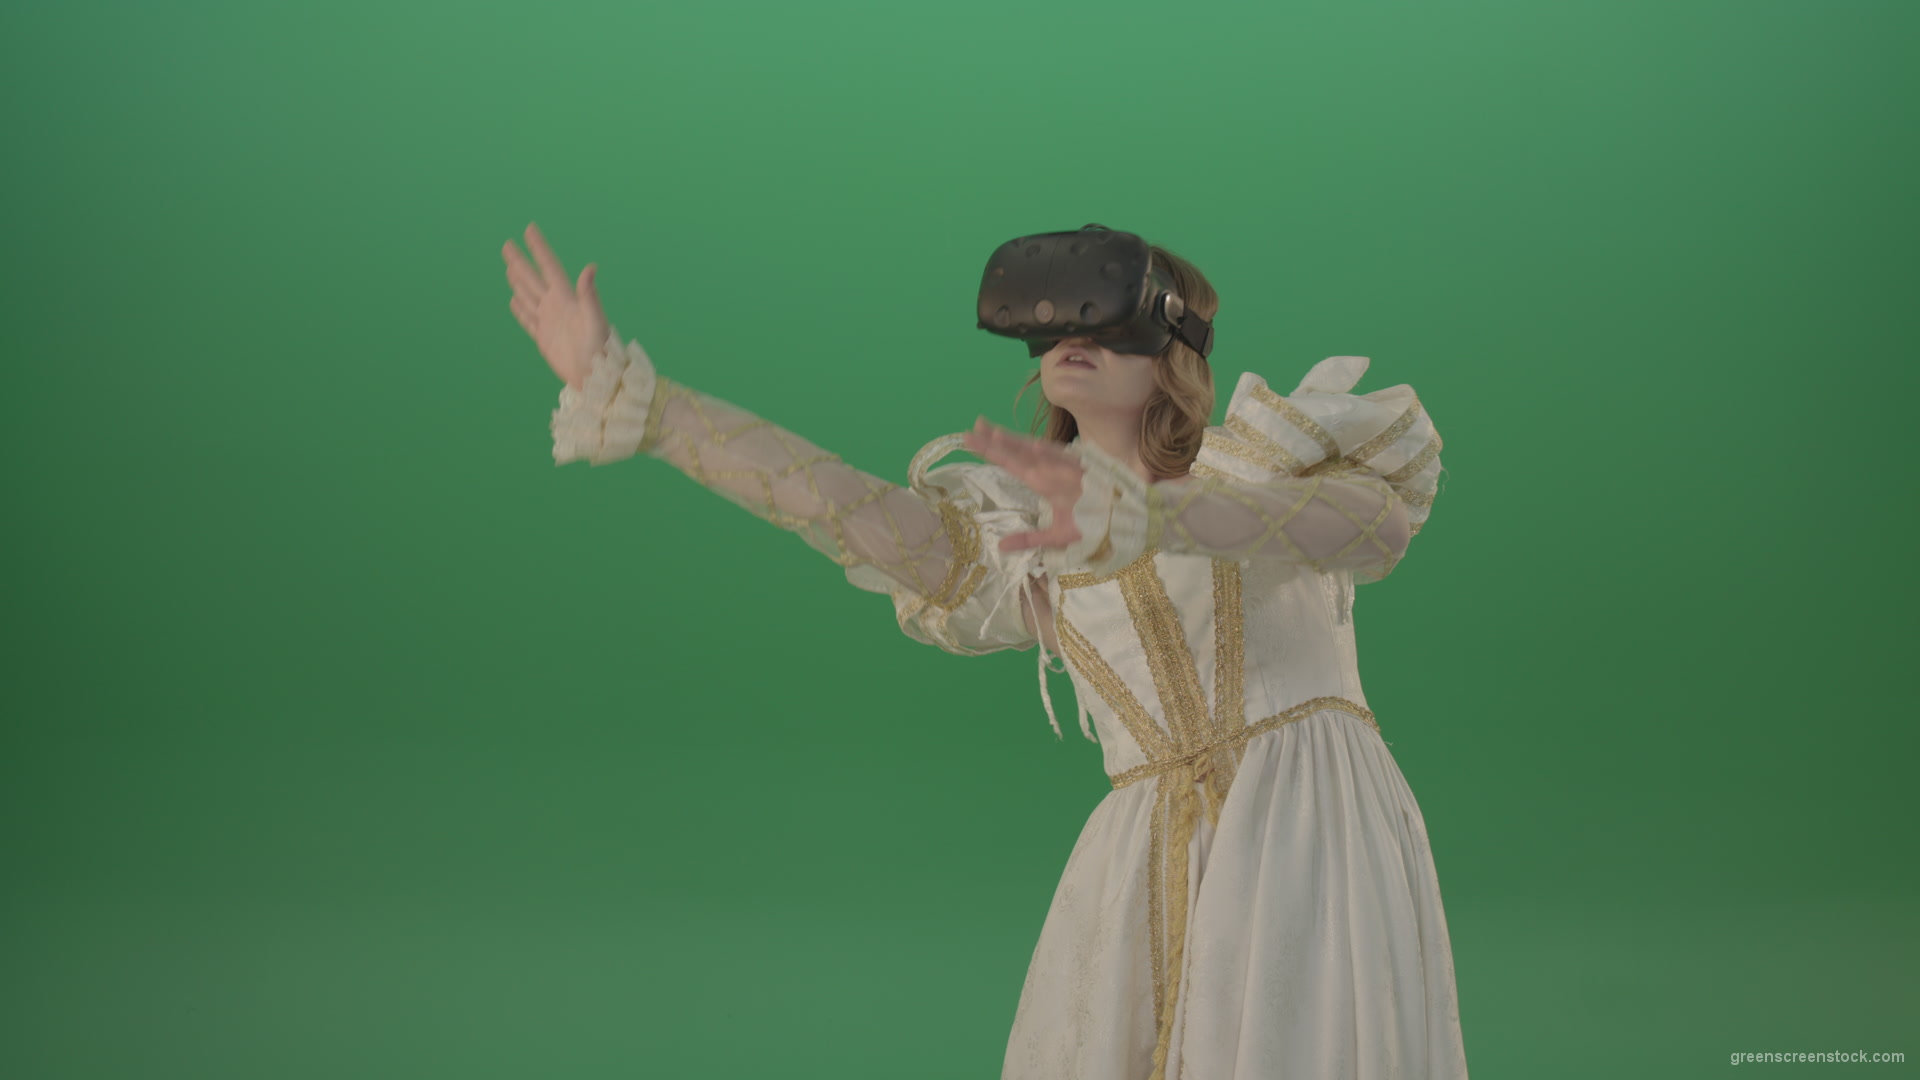 3d-glasses-of-virtual-reality-the-girl-looked-into-the-virtual-world-isolated-on-green-screen_004 Green Screen Stock